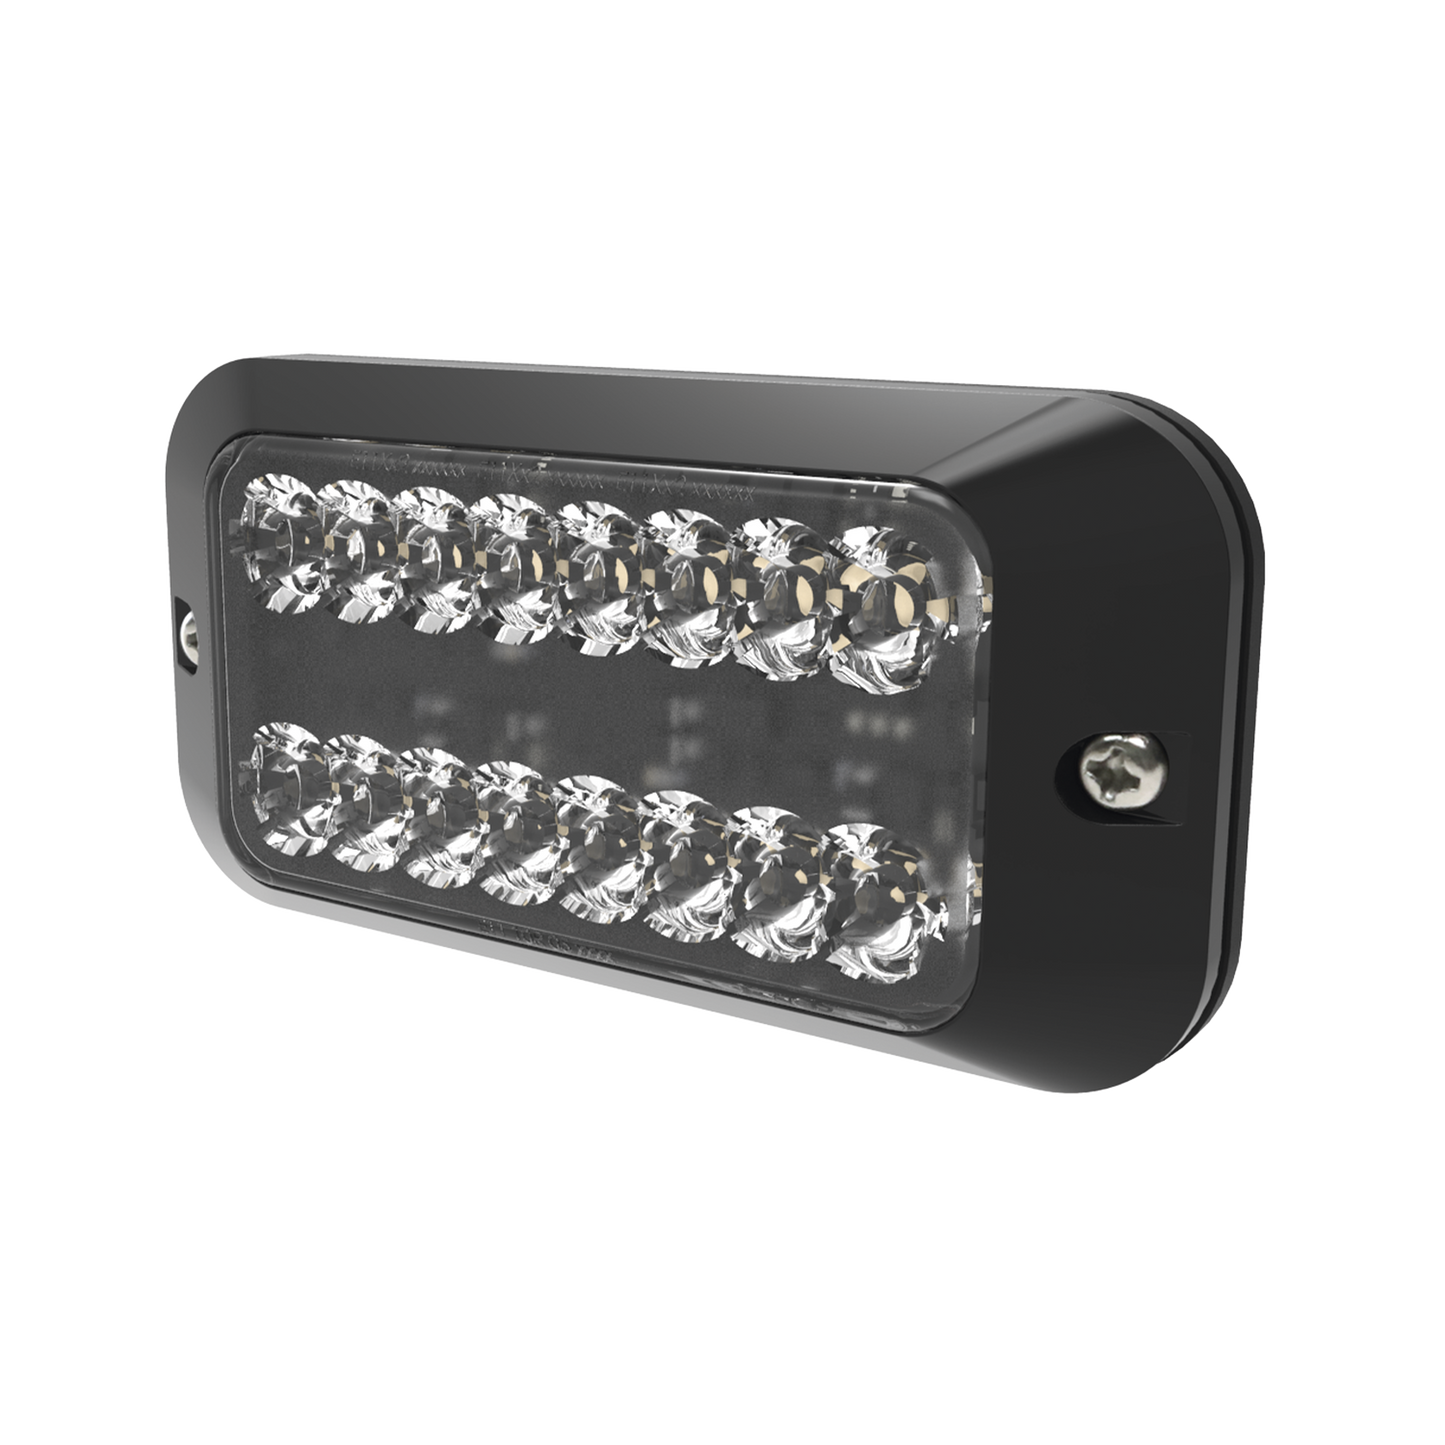 Surface Mount Directional LEDs EDX3789 Series, 8 Ultra Bright LEDs, amber clear.